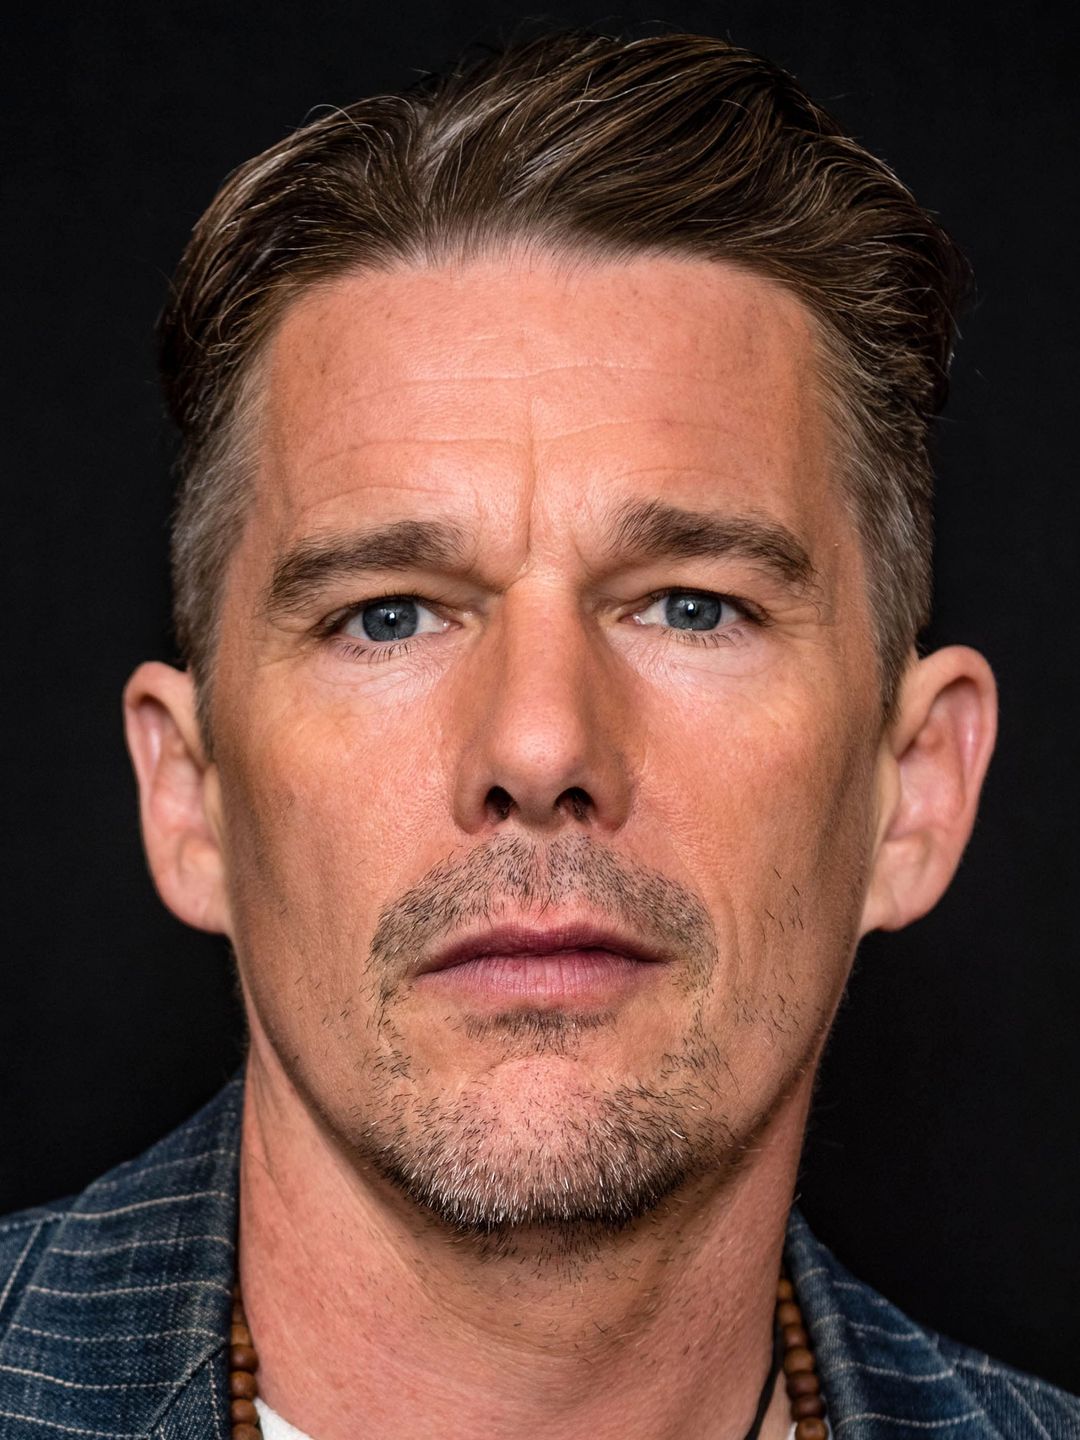 Ethan Hawke way to fame